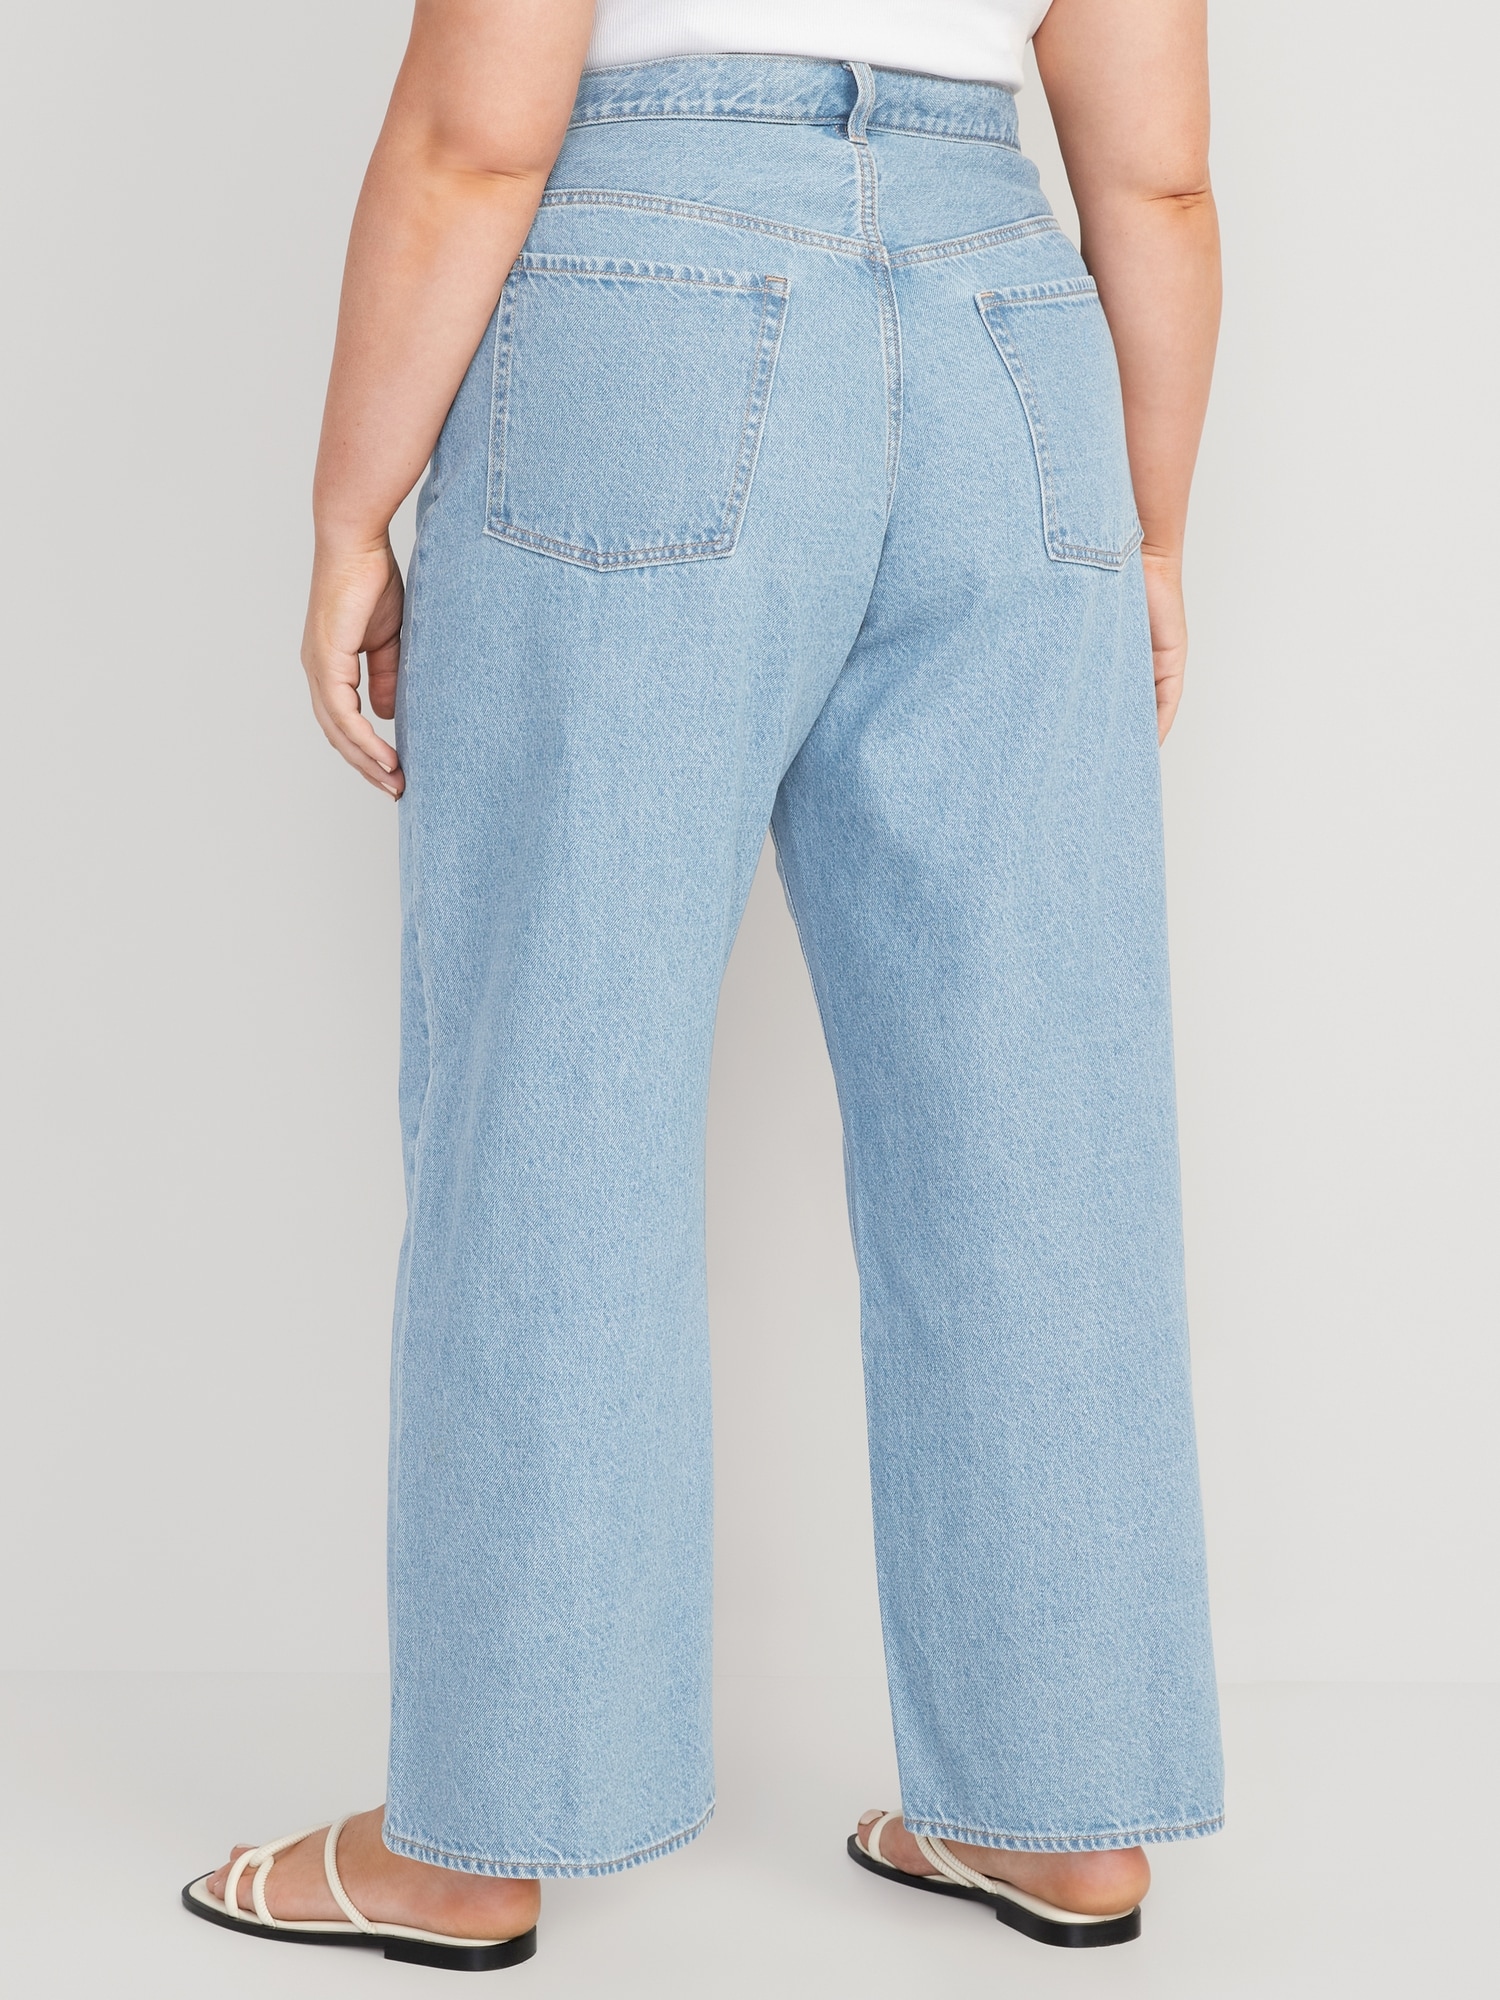 Vintage Streetwear Womens Baggy High Waisted Baggy Jeans With Wide Legs,  Large Pockets, And Denim Fabric By Y2K From Just4urwear, $20.83